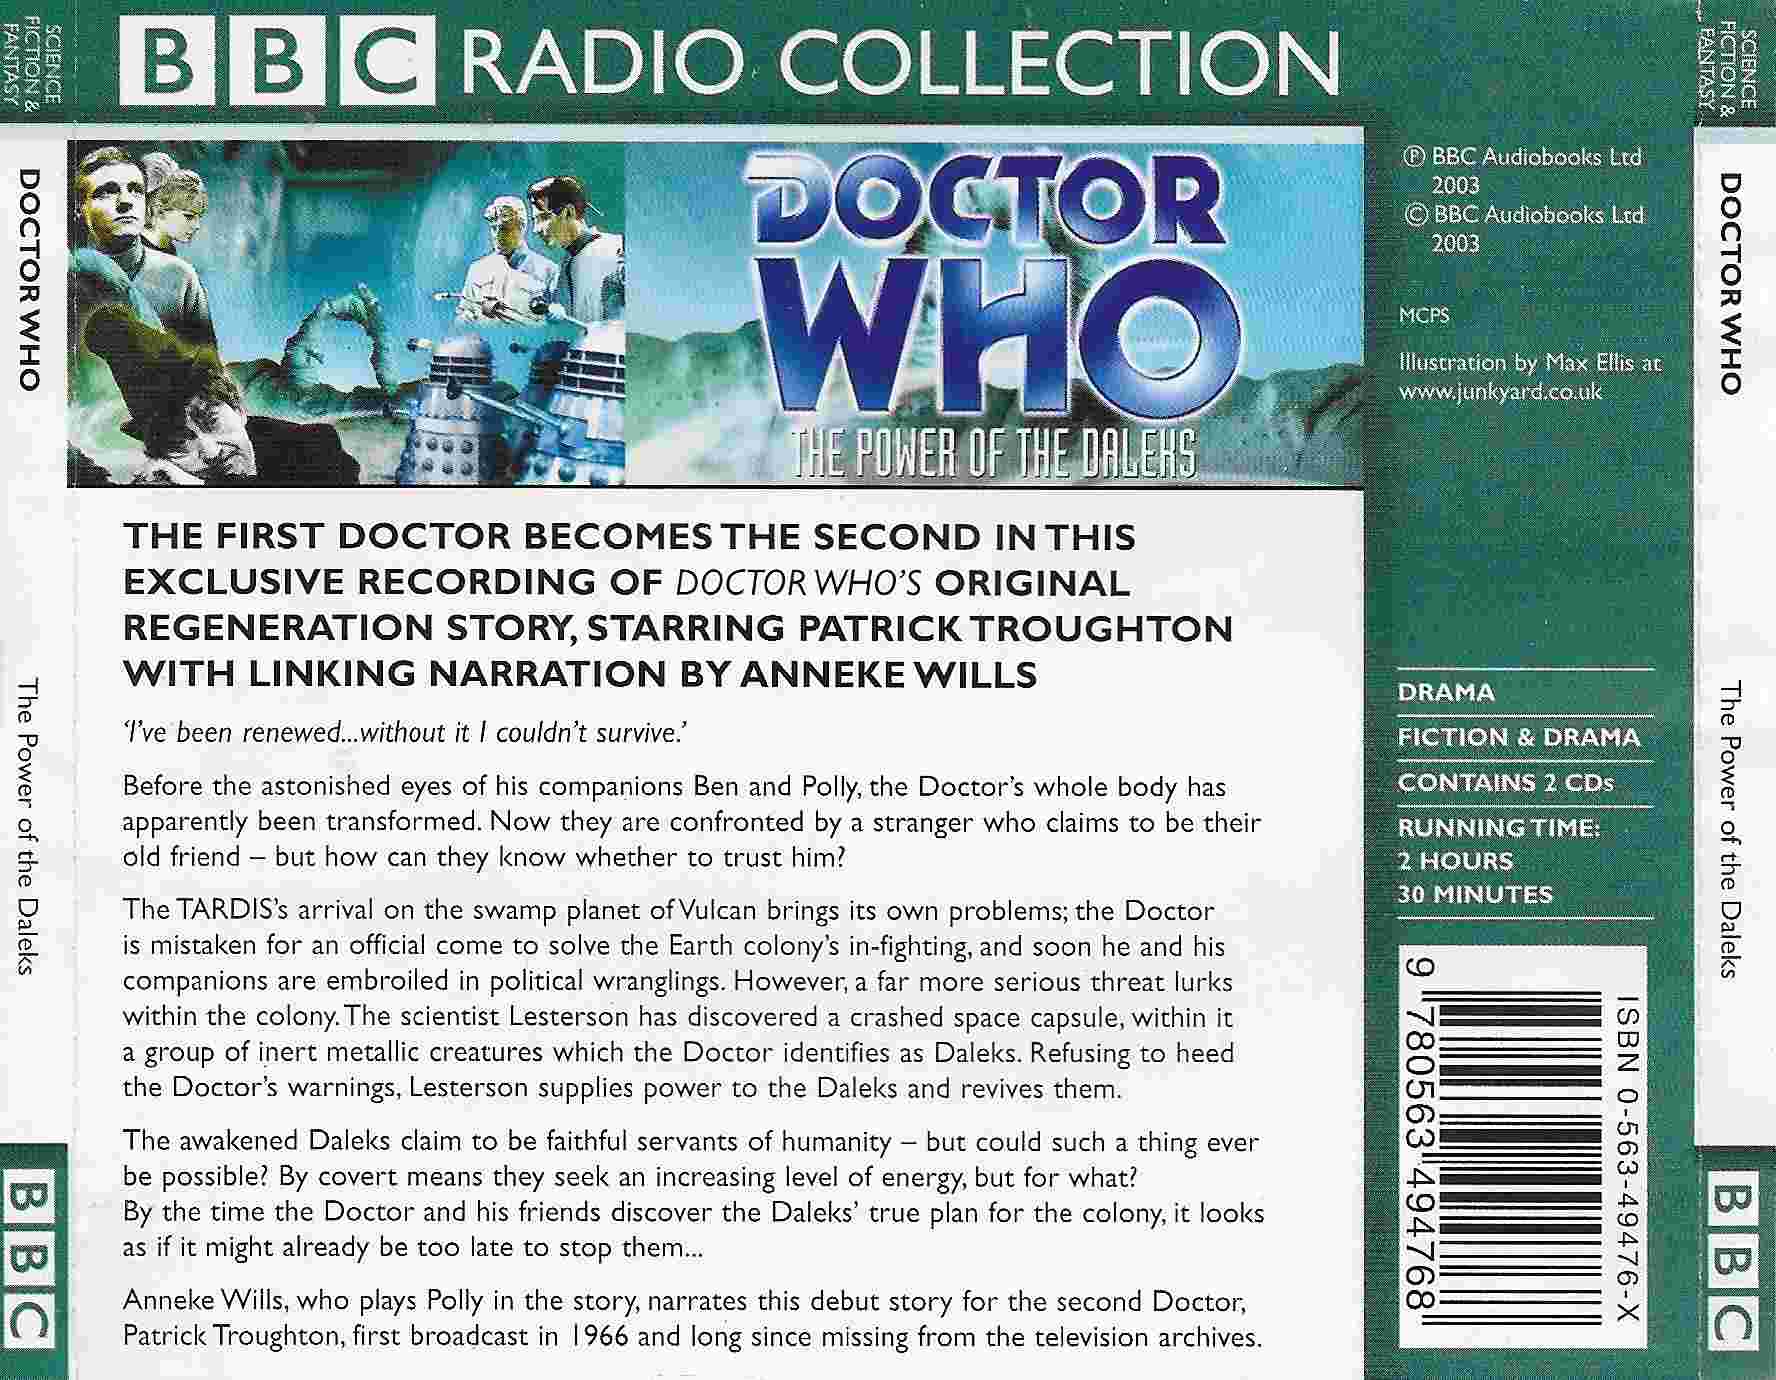 Picture of ISBN 0-563-49476-X1 Doctor Who - The power of the Daleks by artist David Whitaker from the BBC records and Tapes library